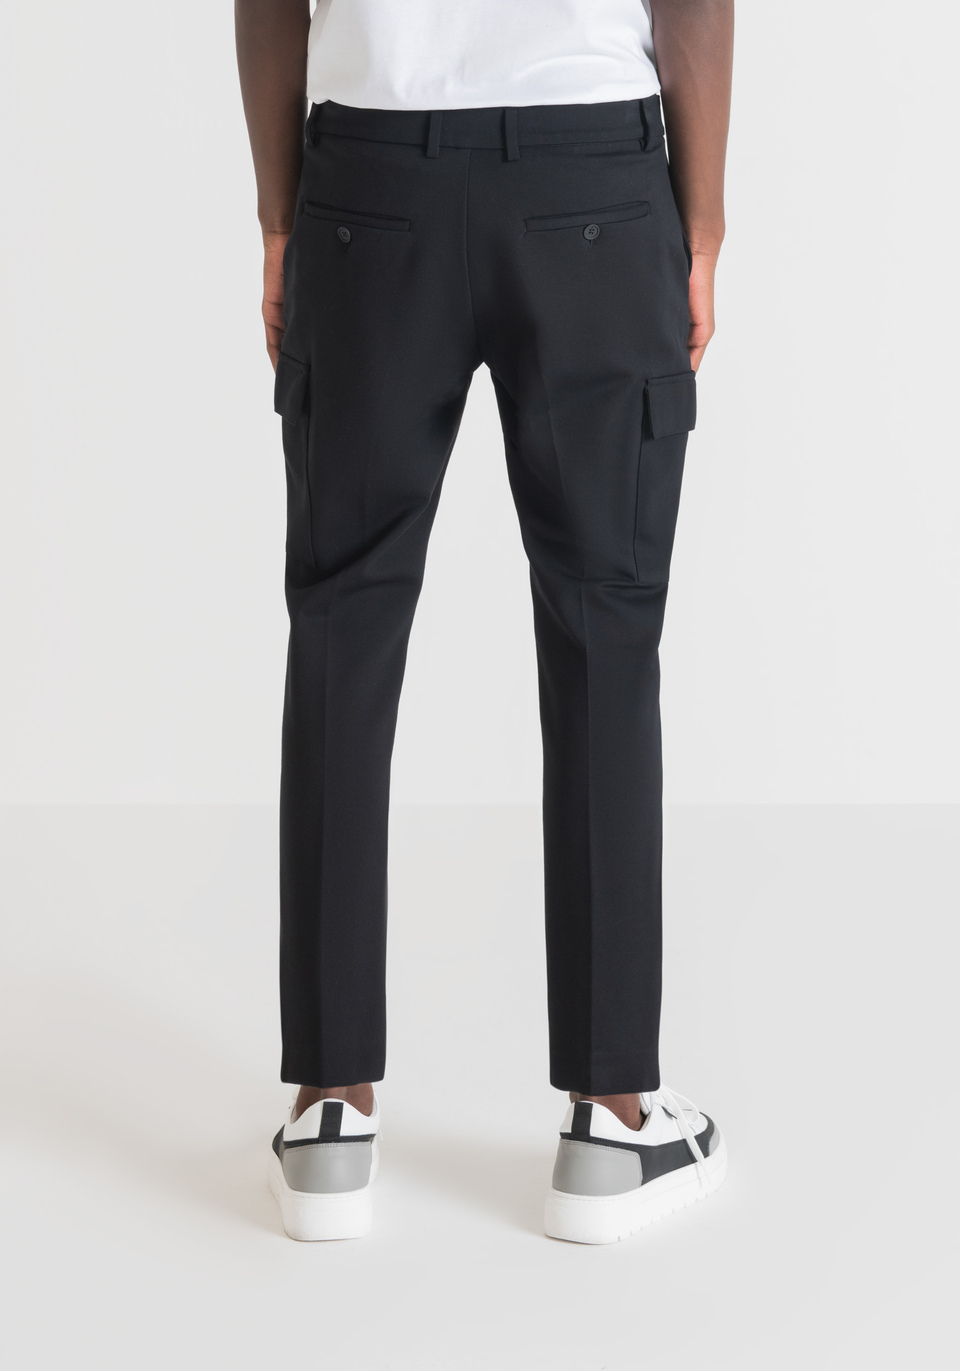 "BJORN" SKINNY FIT TROUSERS WITH LARGE POCKETS - Antony Morato Online Shop